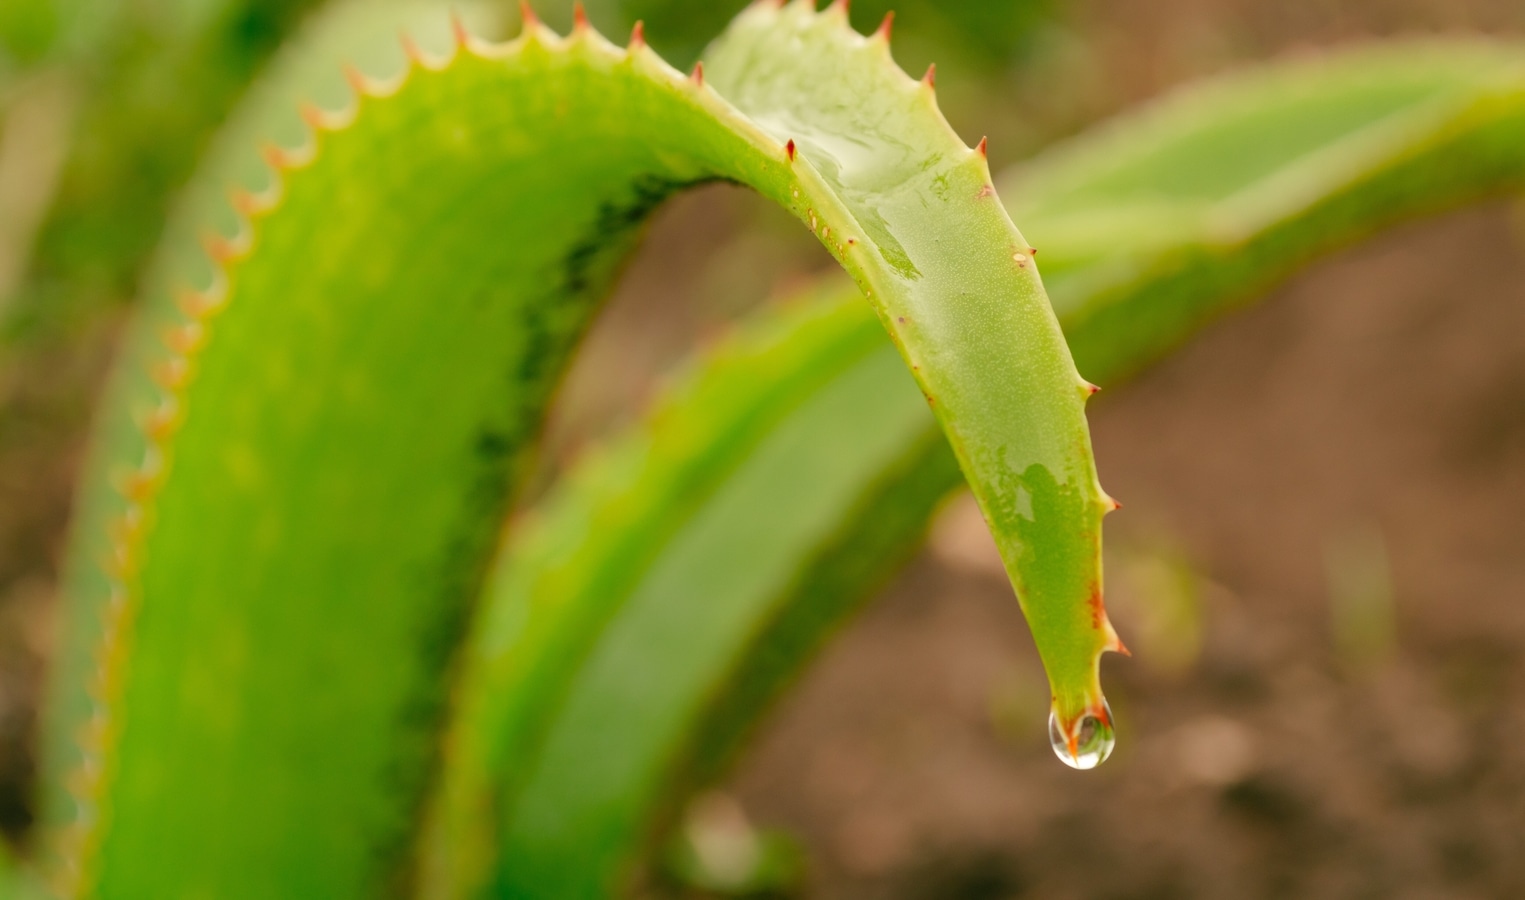 Tips to deal with sunburn by using Aloe Vera